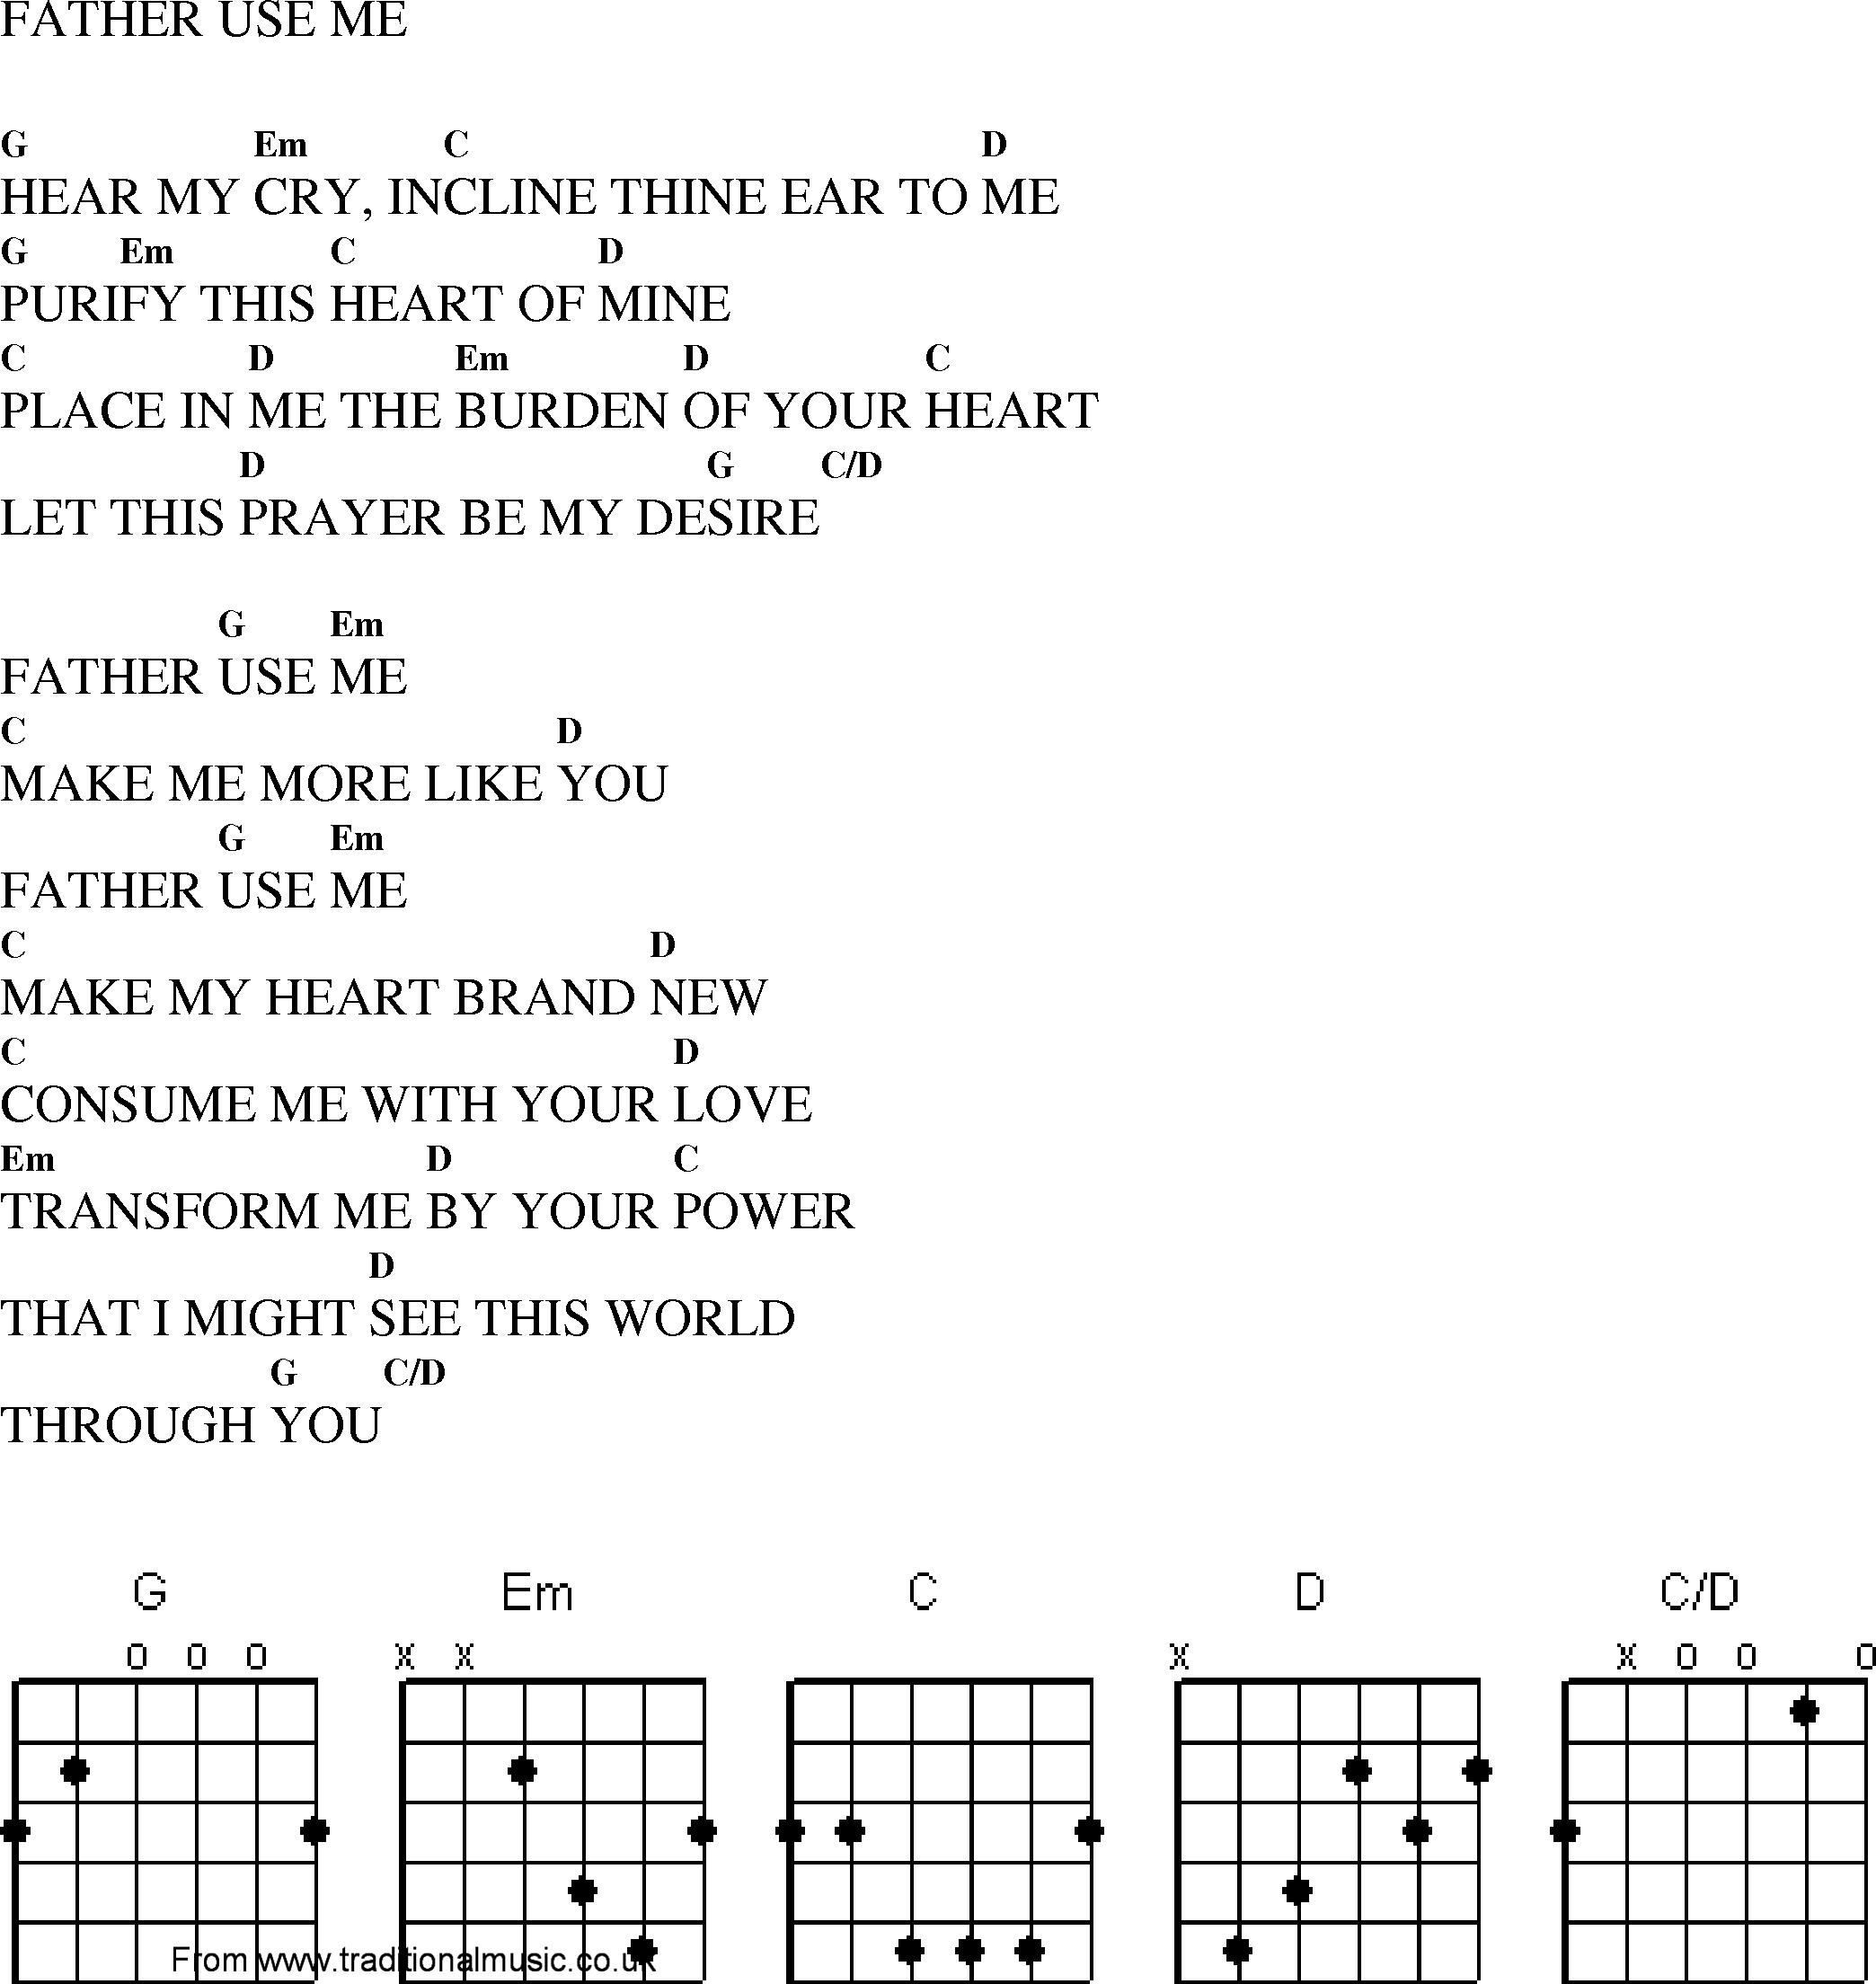 Gospel Song: father_use_me, lyrics and chords.